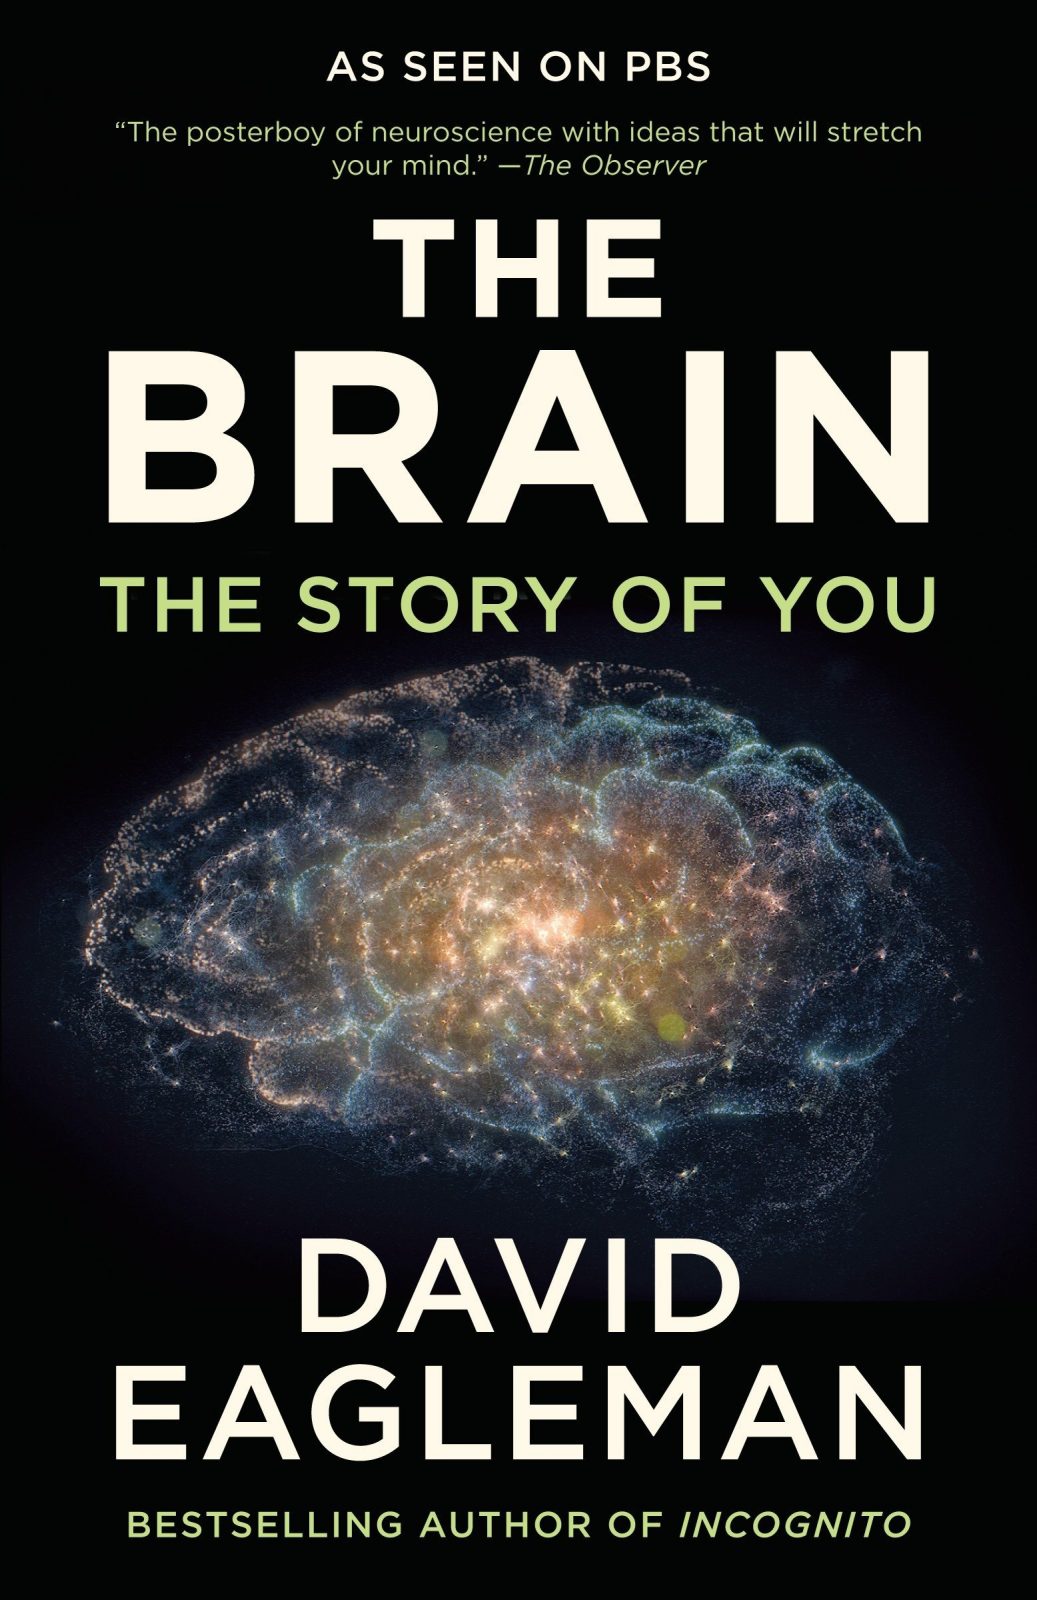 Eagleman - The Brain: The Story of You